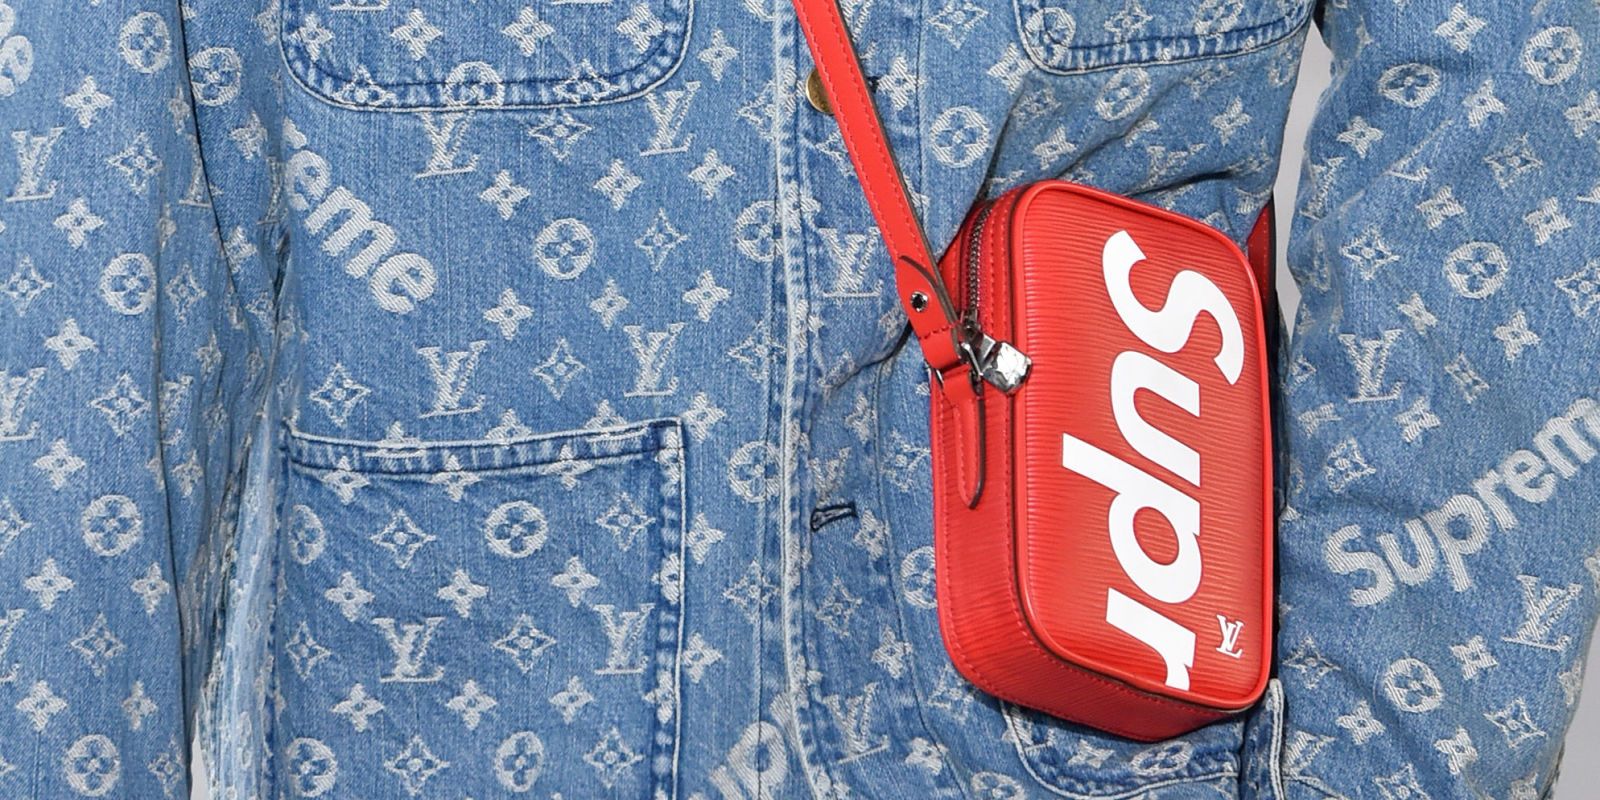 Louis Vuitton in collaboration with Supreme popup stores prompt global  shopping stampede  Financial Times